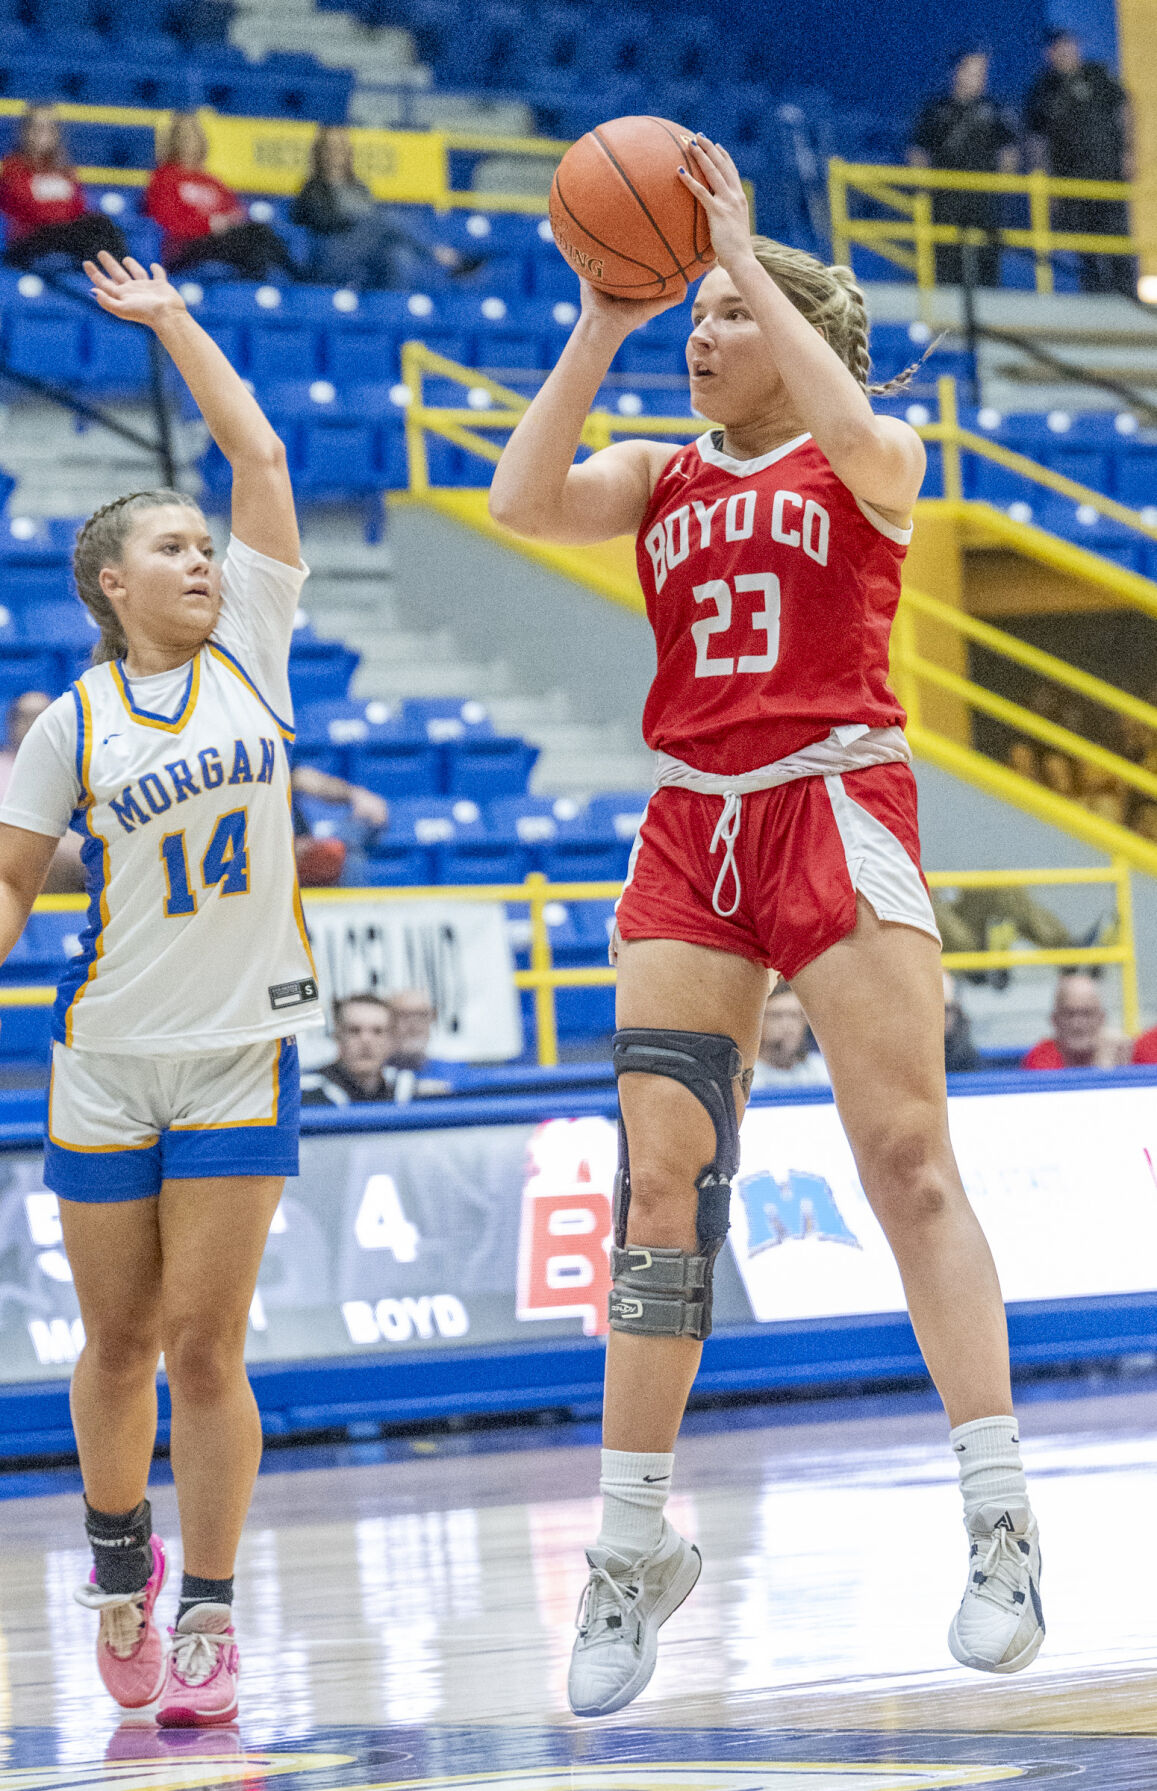 Boyd County Lions Triumph Over Morgan County Cougars in 16th Region Girls Quarters with Jordan and Biggs leading the Charge